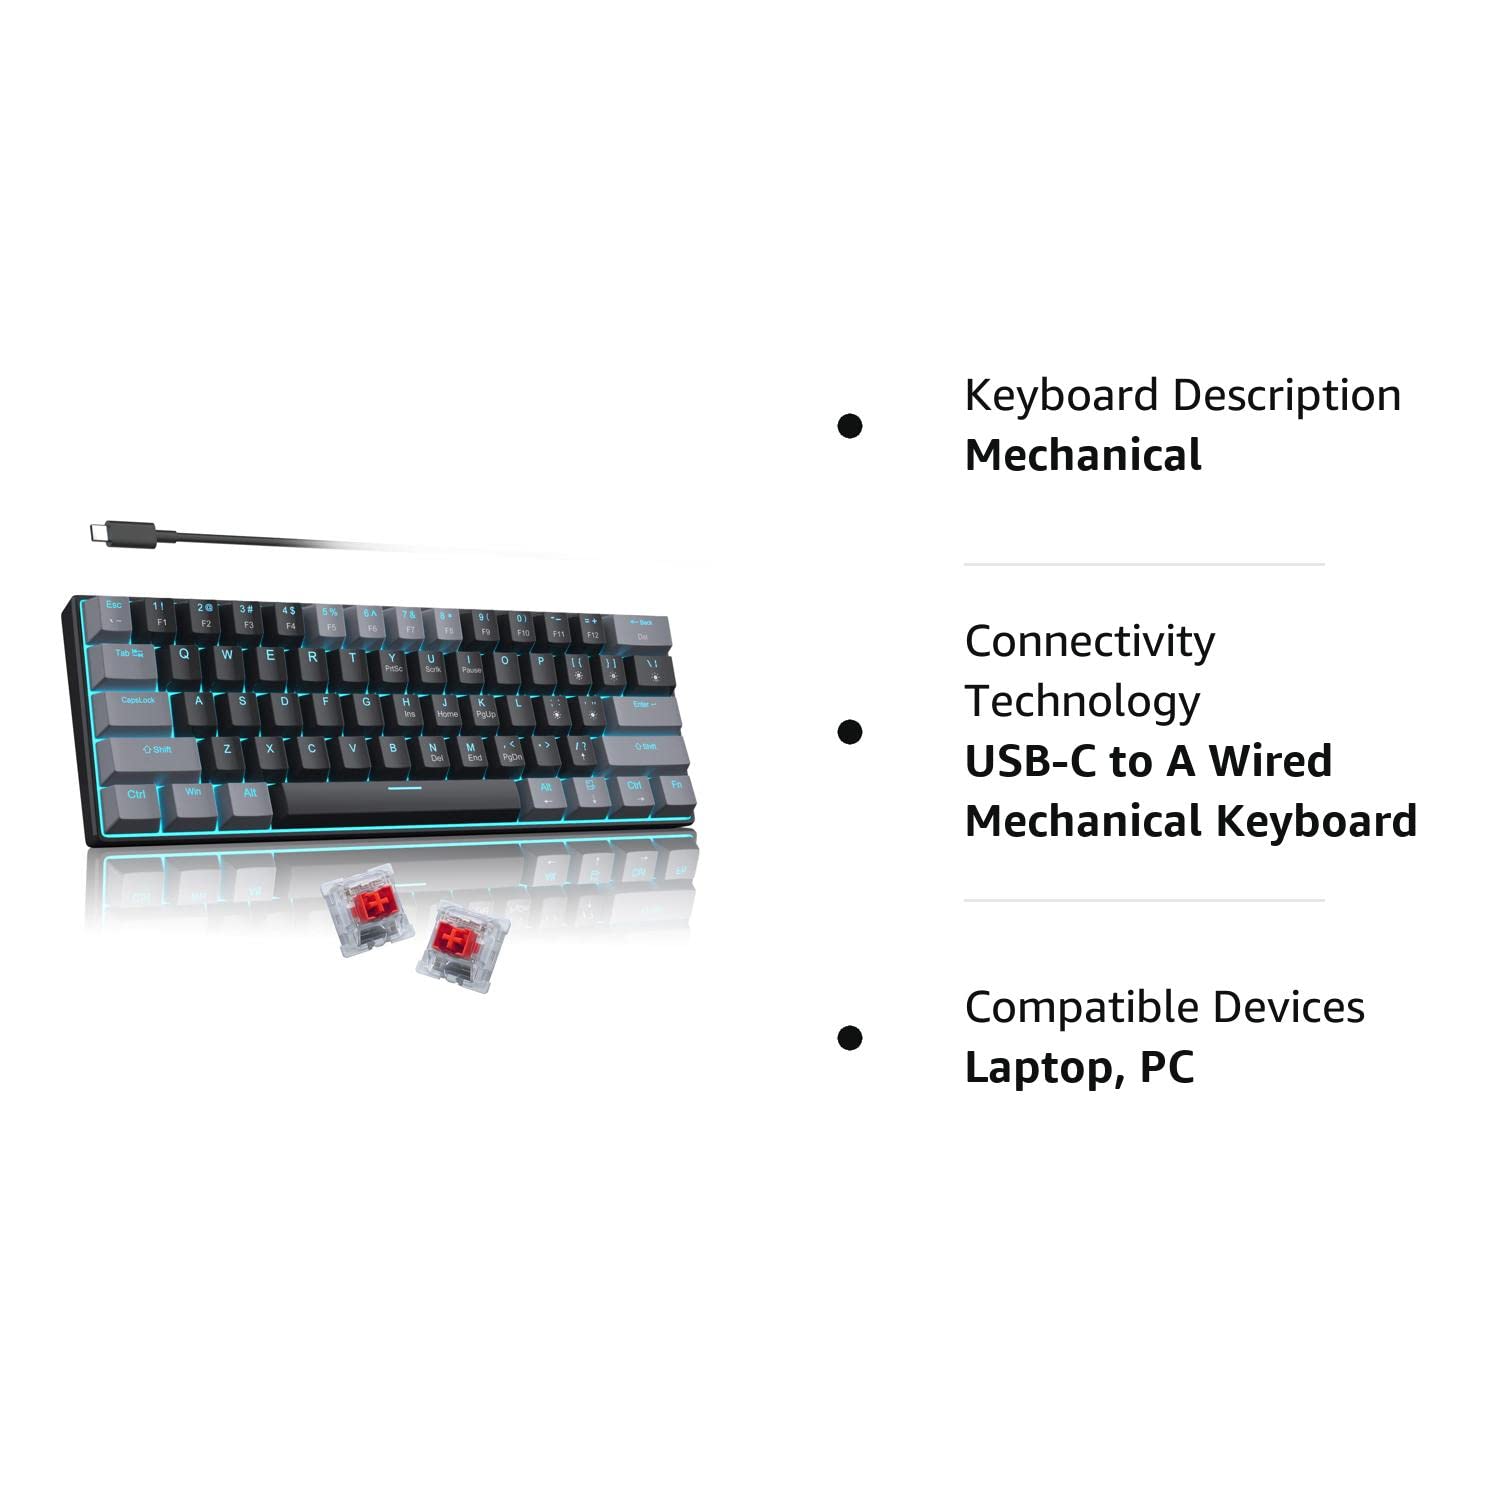 60 Percent Mechanical Gaming Keyboard,Gray&Black Mixed Color Keycaps Gaming Keyboard with Red Switches, Detachable Type-C Cable Mini Keyboard with Powder Blue Light for Windows/Mac/PC/Laptop